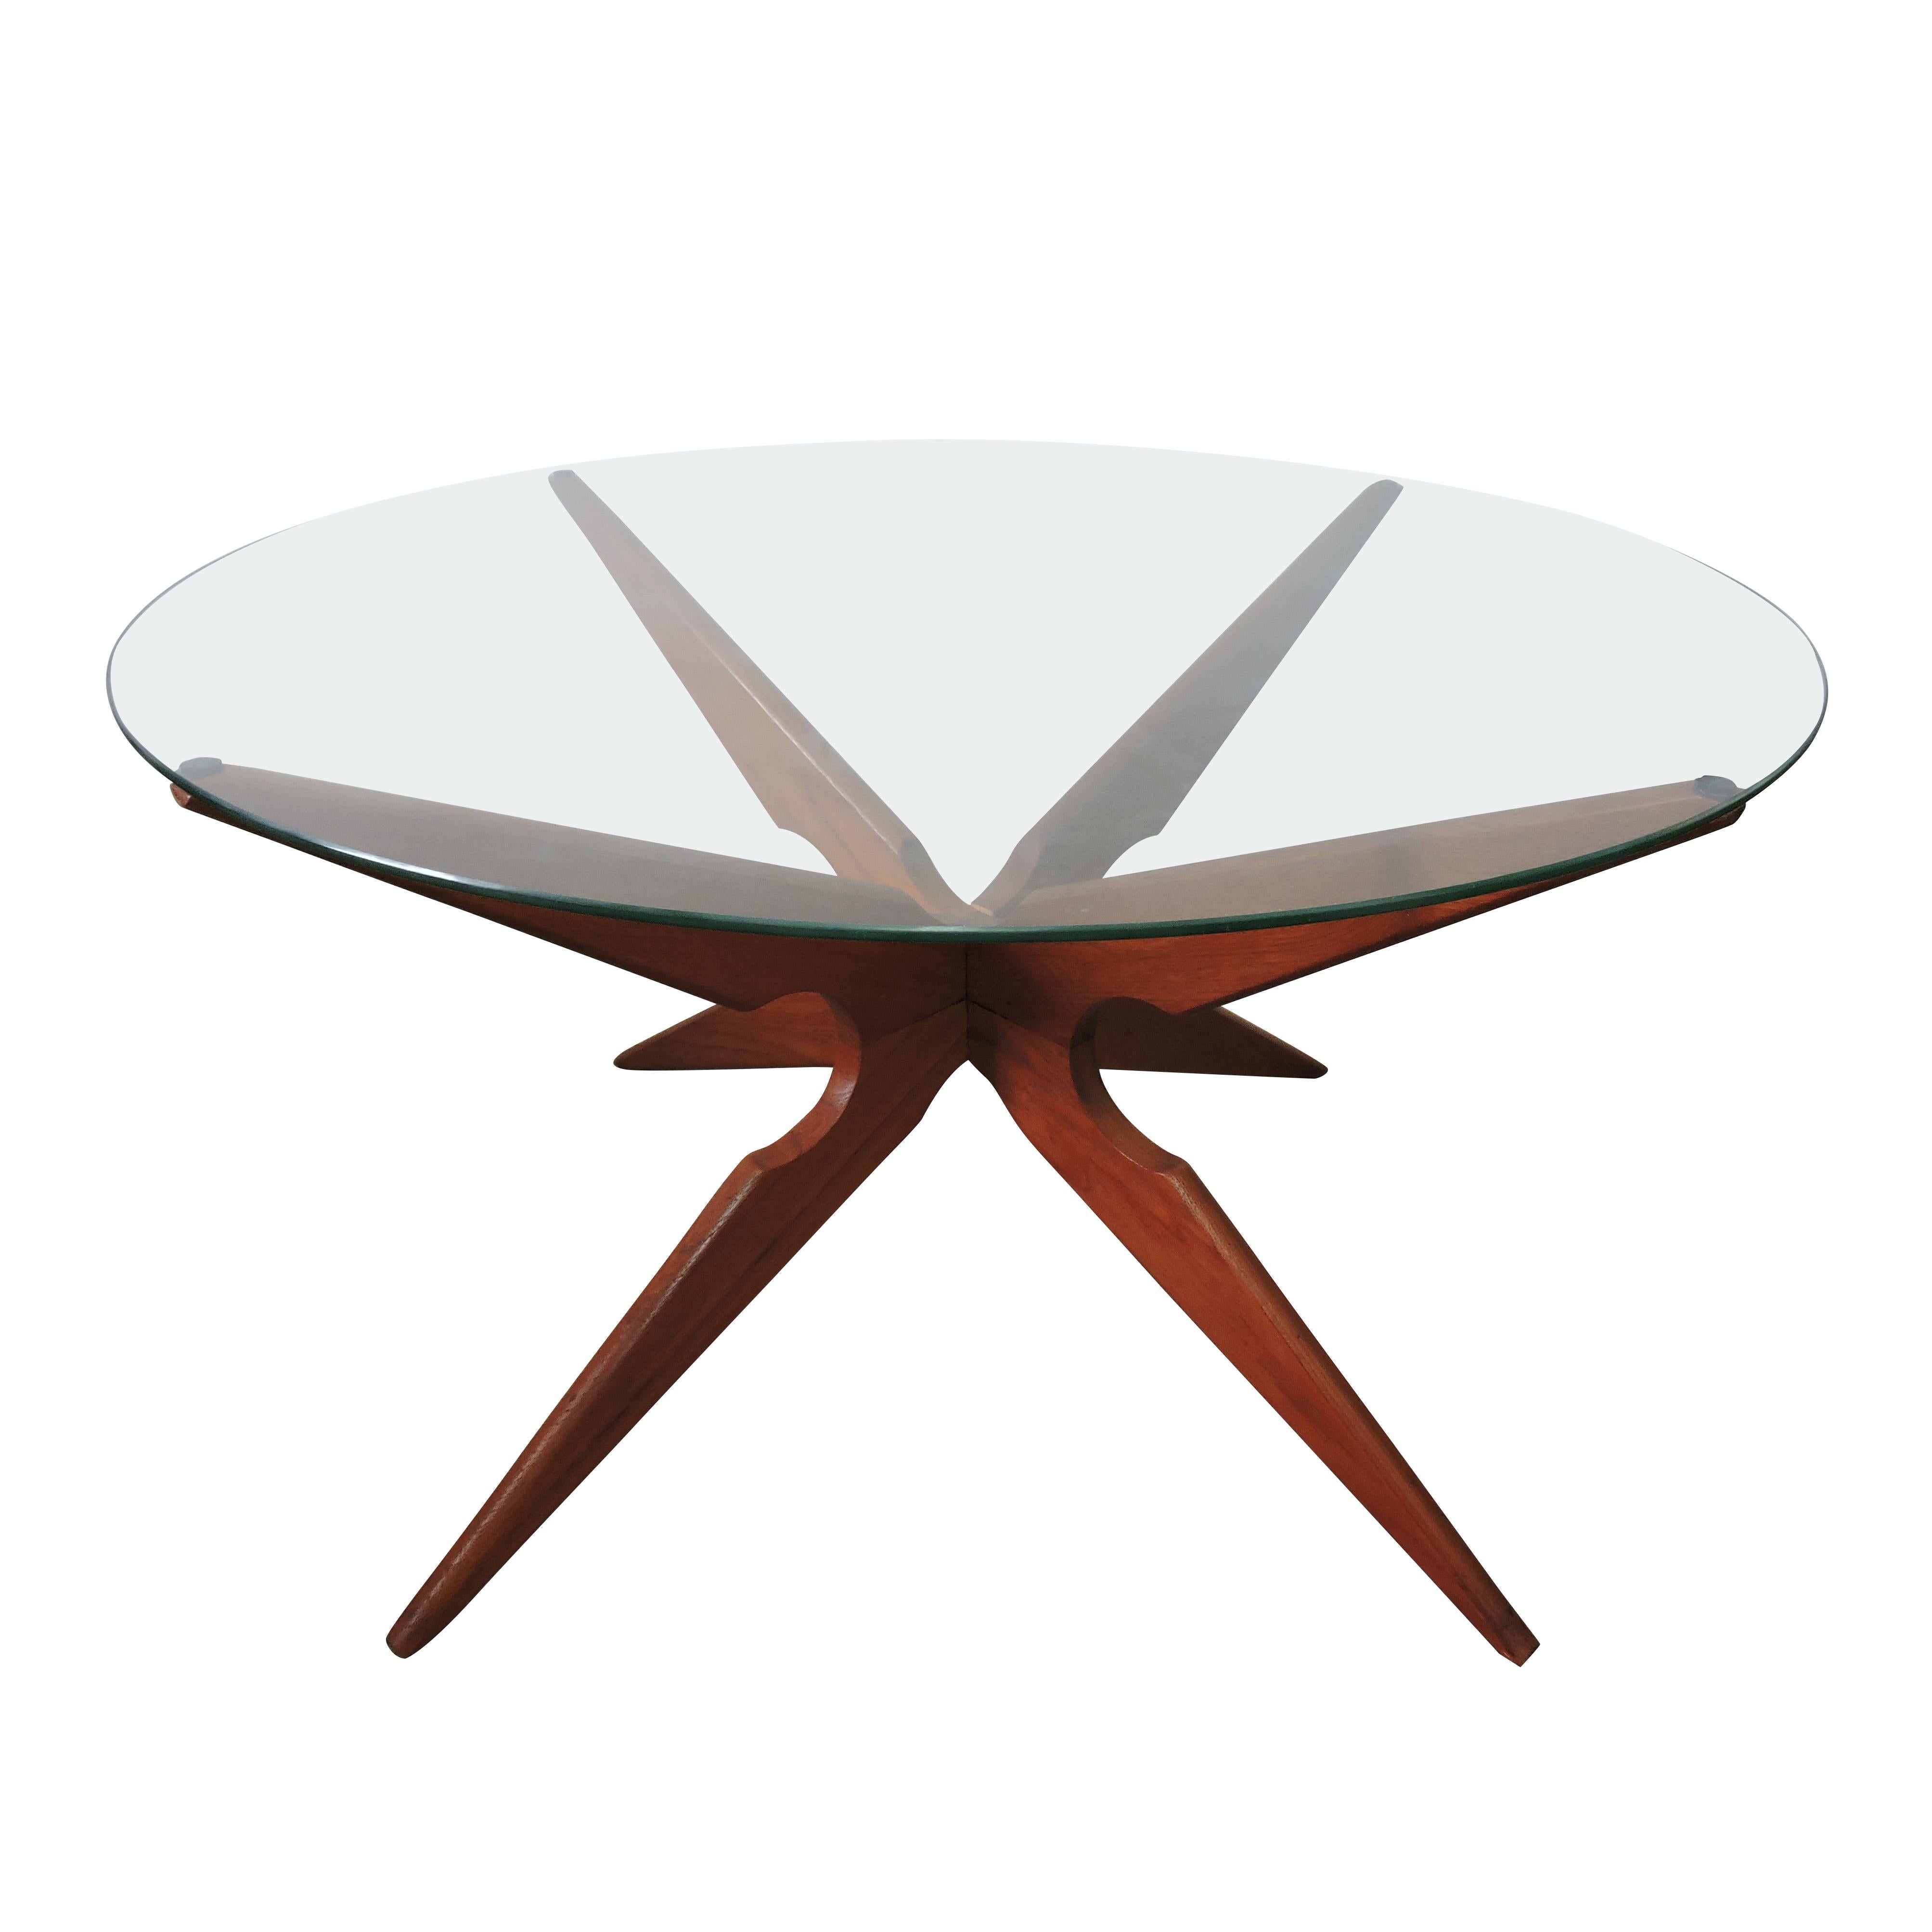 Sika Mobler glass 'Spider' coffee table.
Featuring a two part base that slots together to form the star, and a round glass table top. The glass has light scratches as expected with the age of the piece.